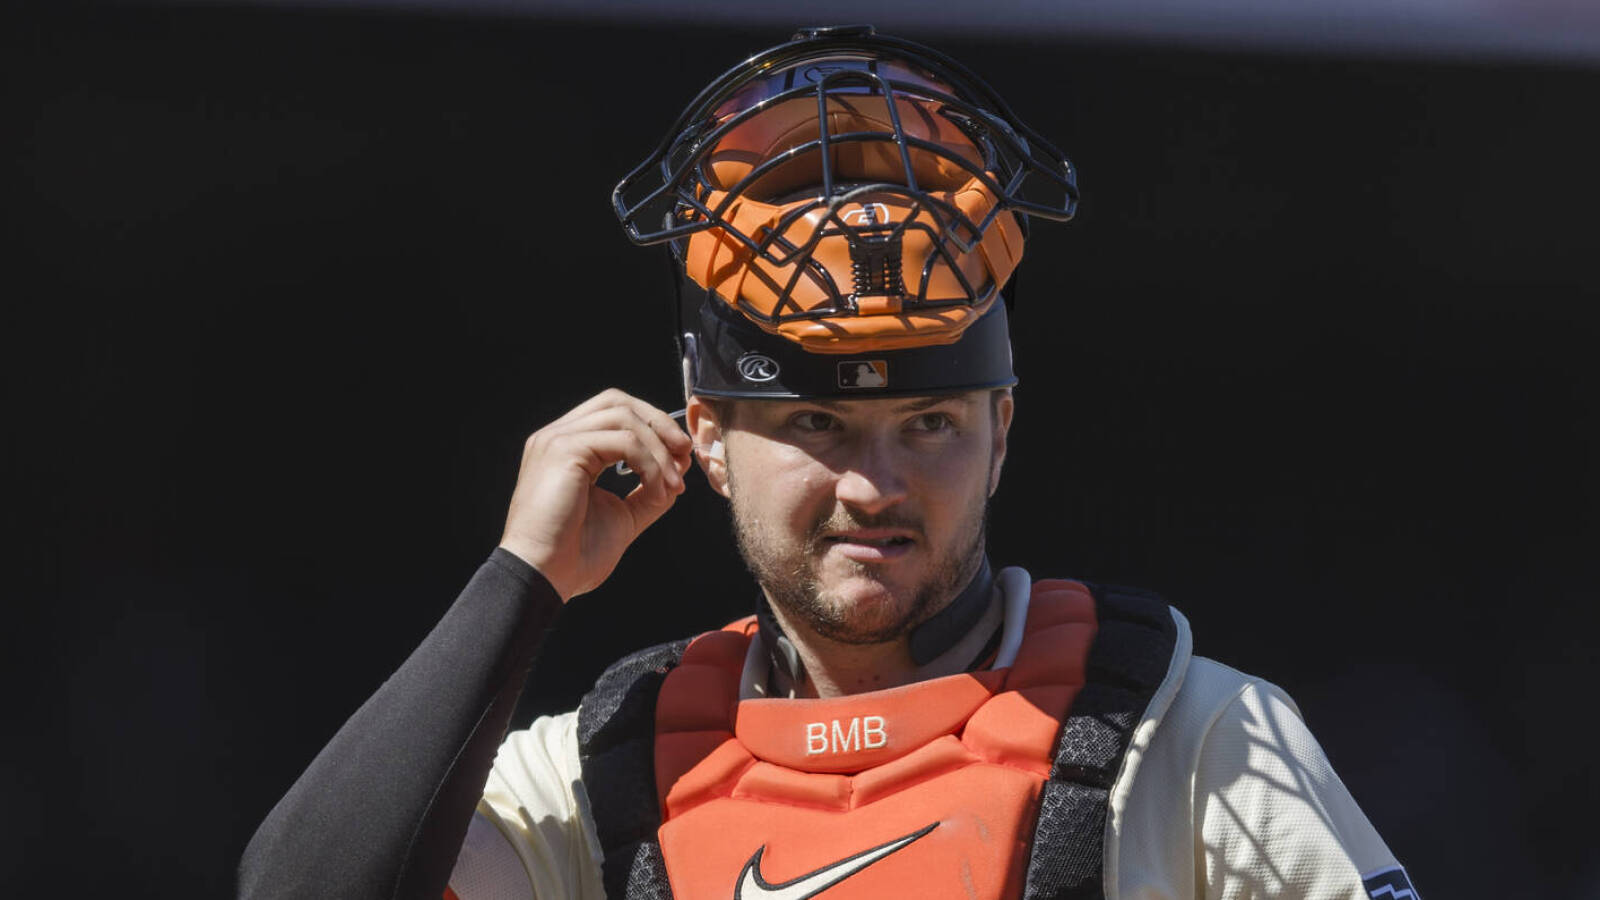 Giants place catcher on seven-day concussion injured list